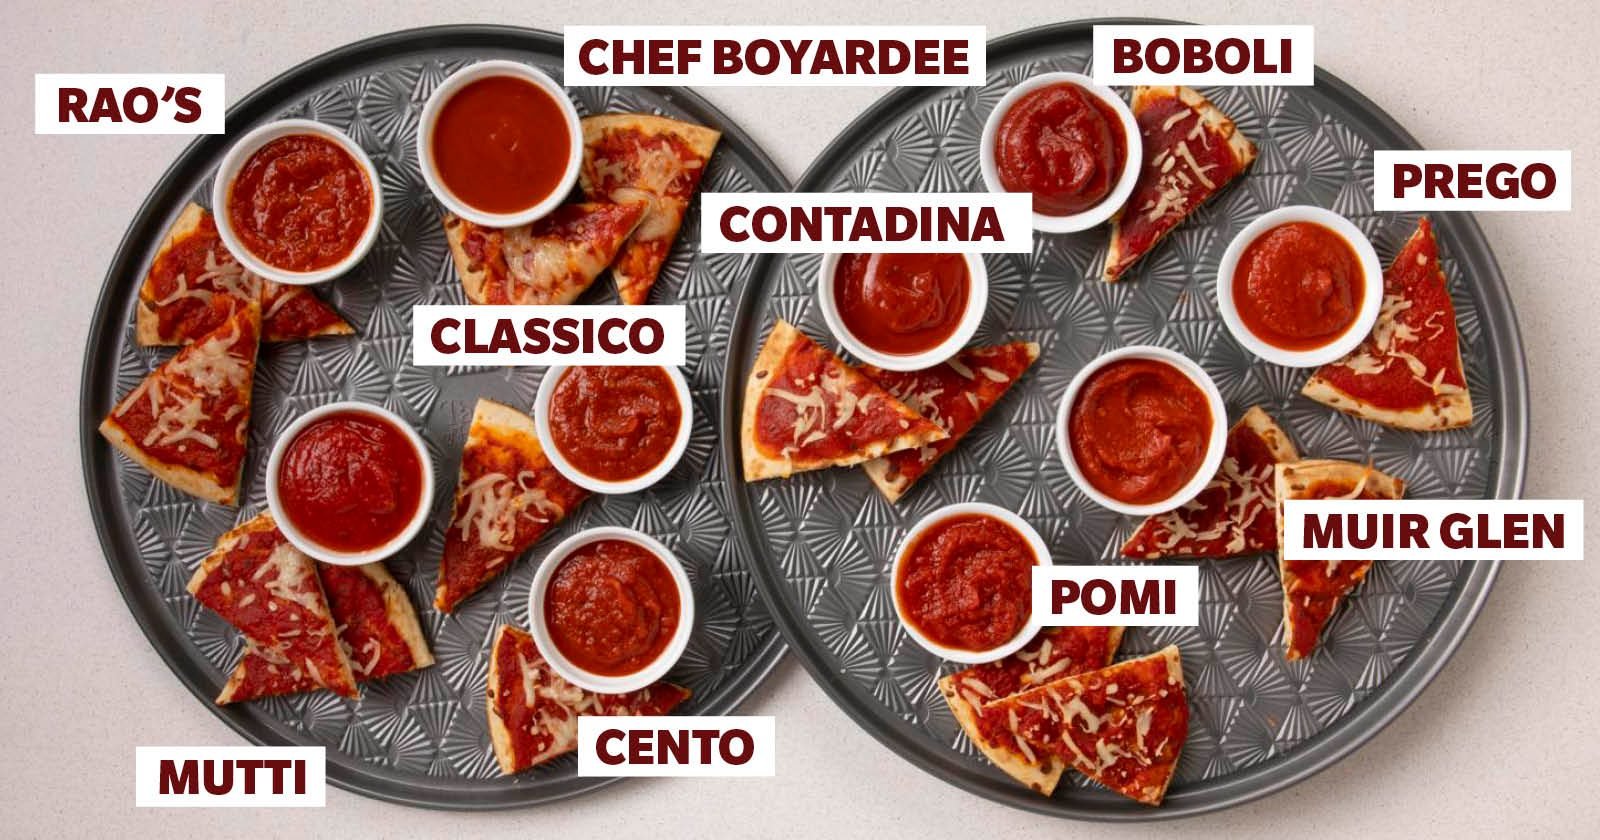 How to Make the Best Homemade Pizza—According to the Pros